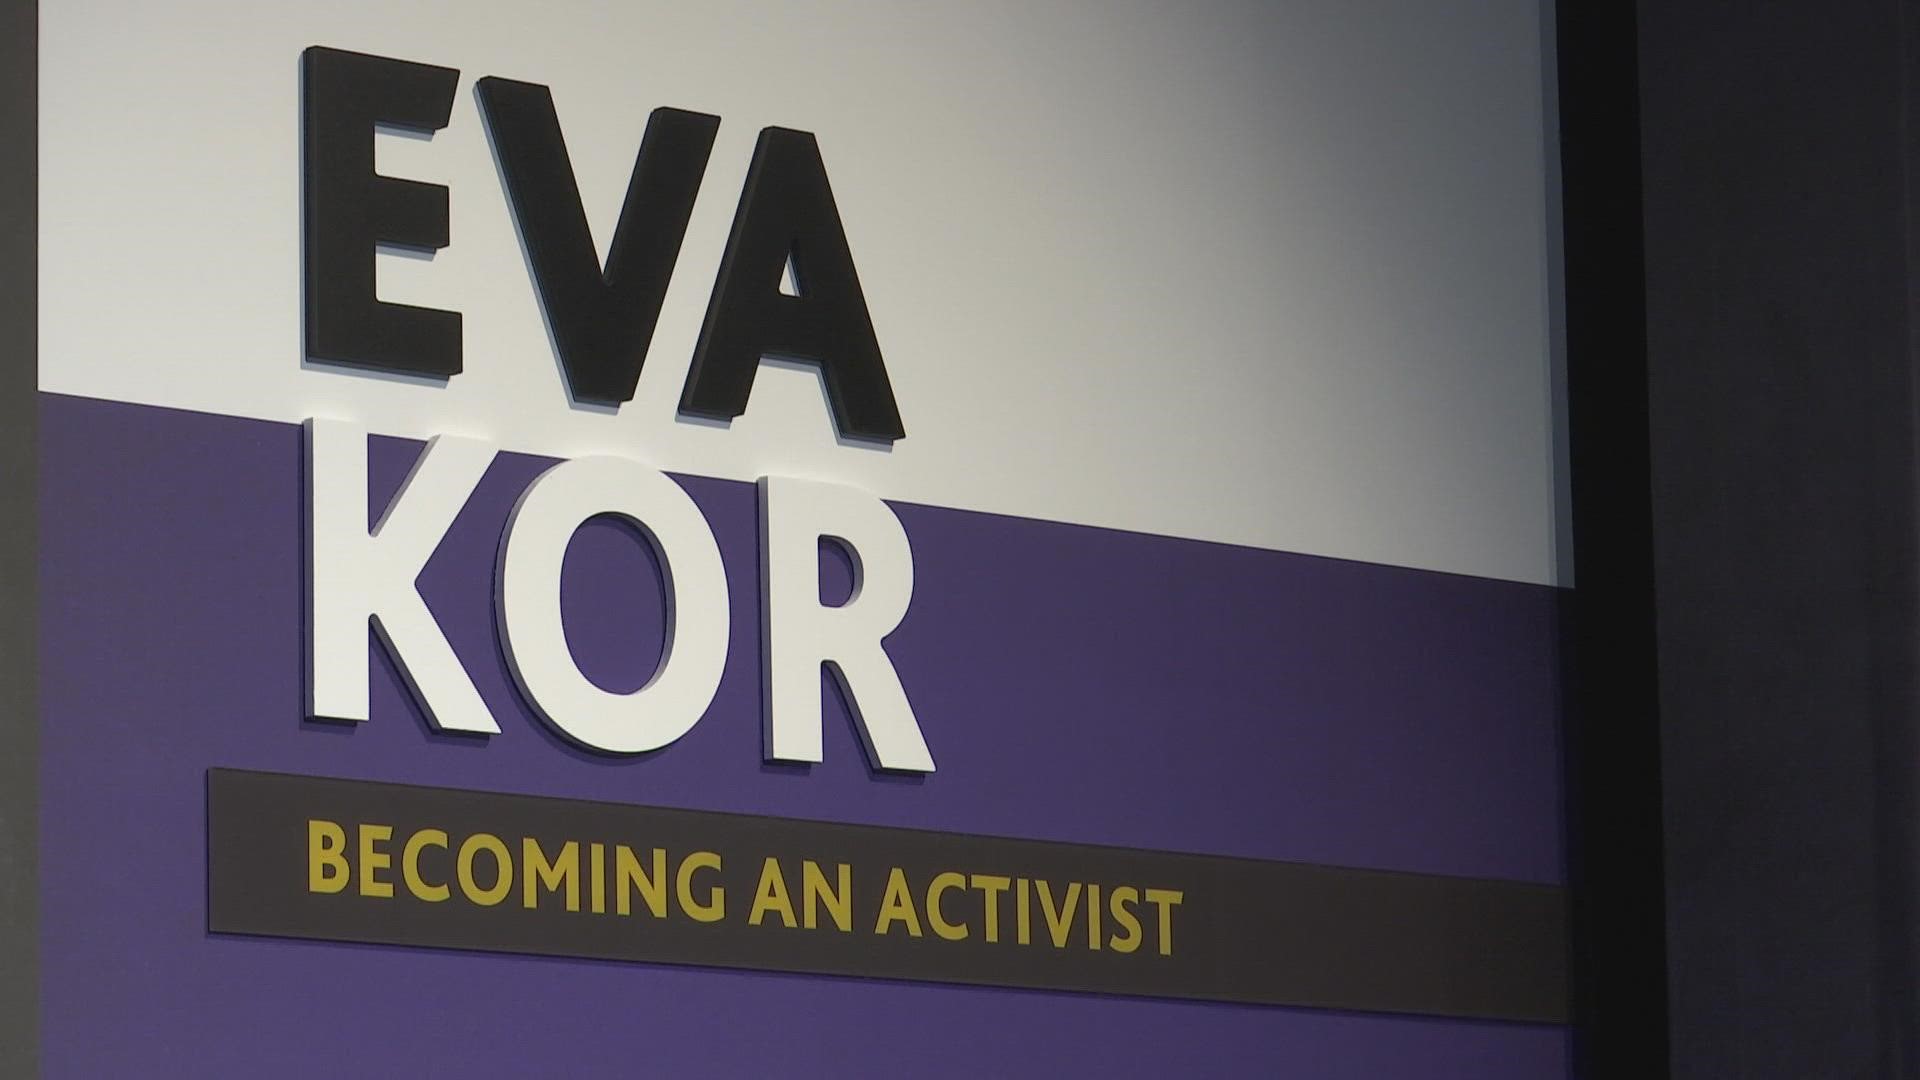 Today, the Hoosier State pauses to remember the life and legacy of Eva Kor.